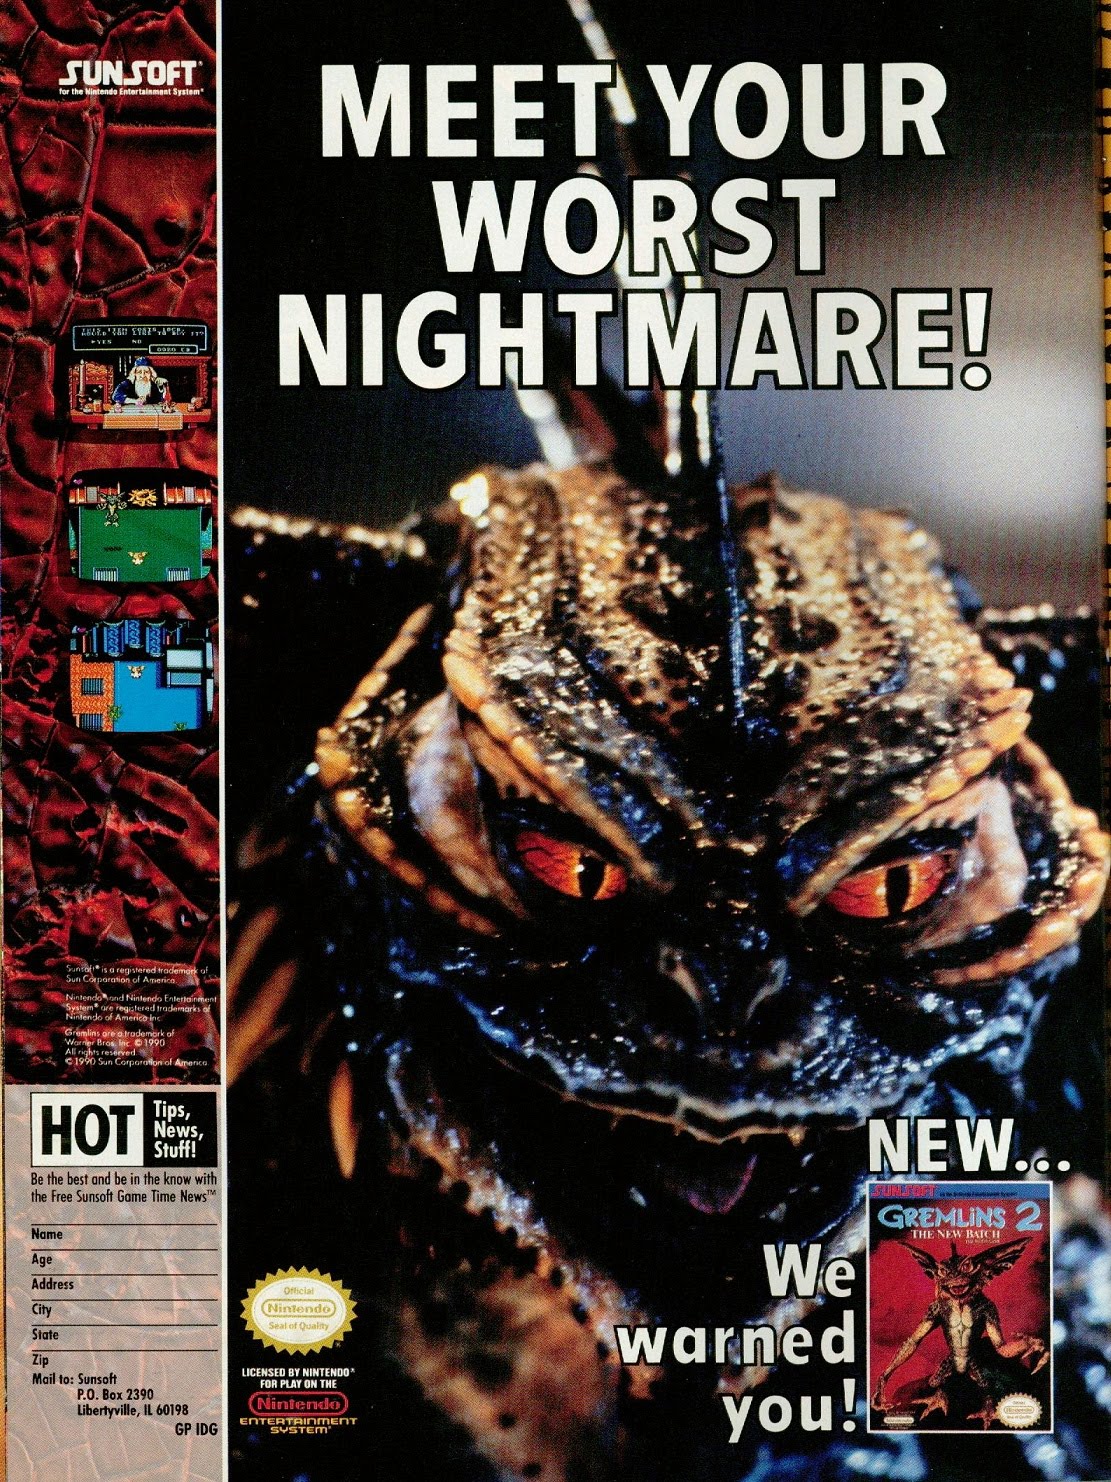 vintage gaming ads - best game ads - Sun.Soft Meet Your Worst Nightmare! Hots New. We warned you! M